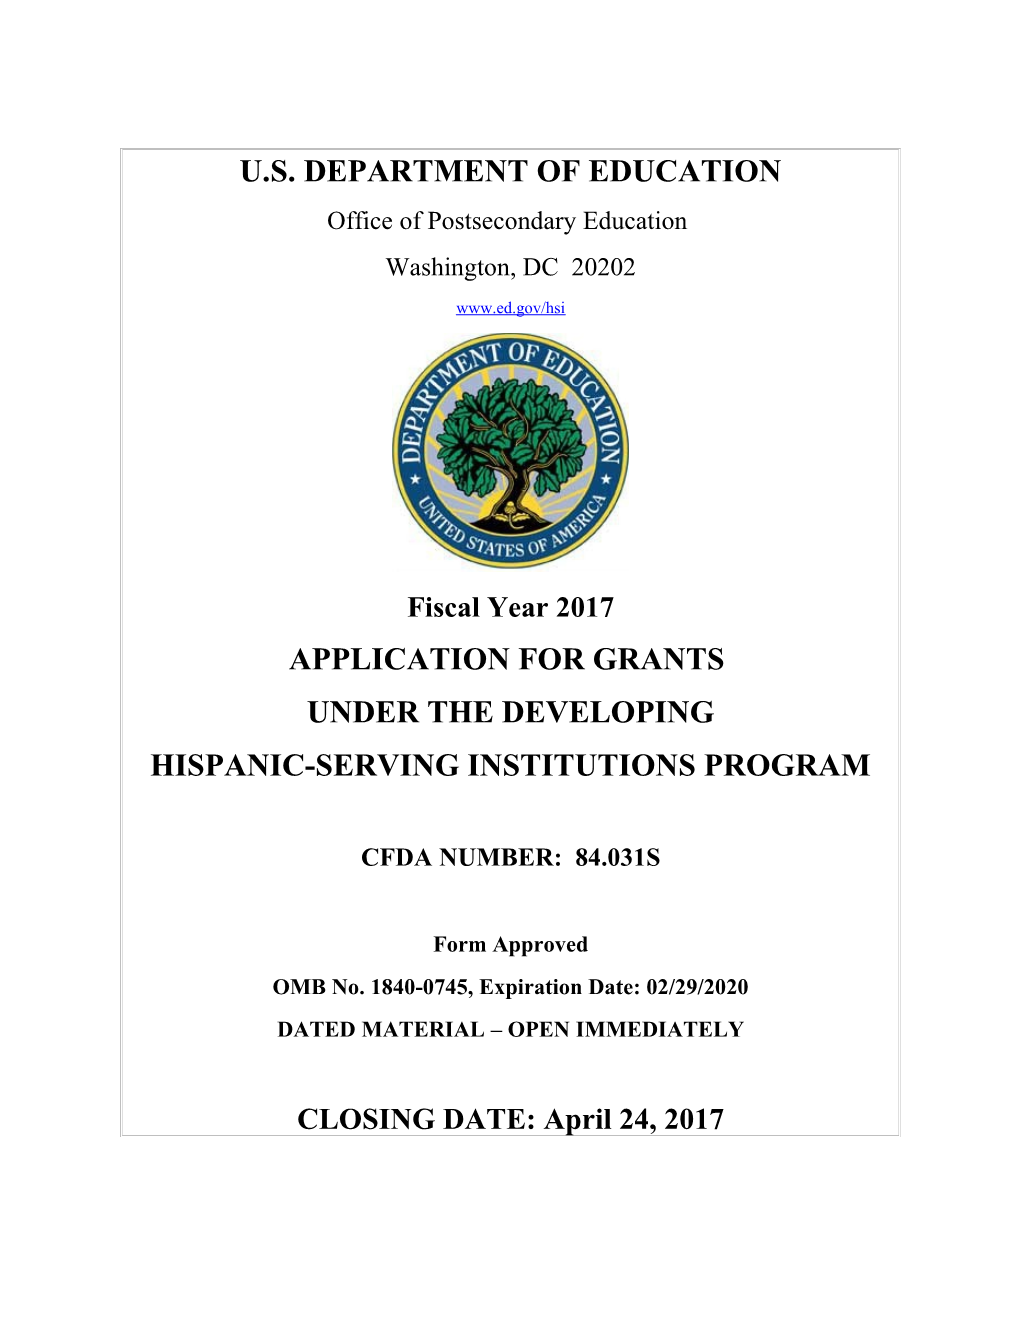 Application for Grants Under the Student Support Services Program, HEA Title IV-A